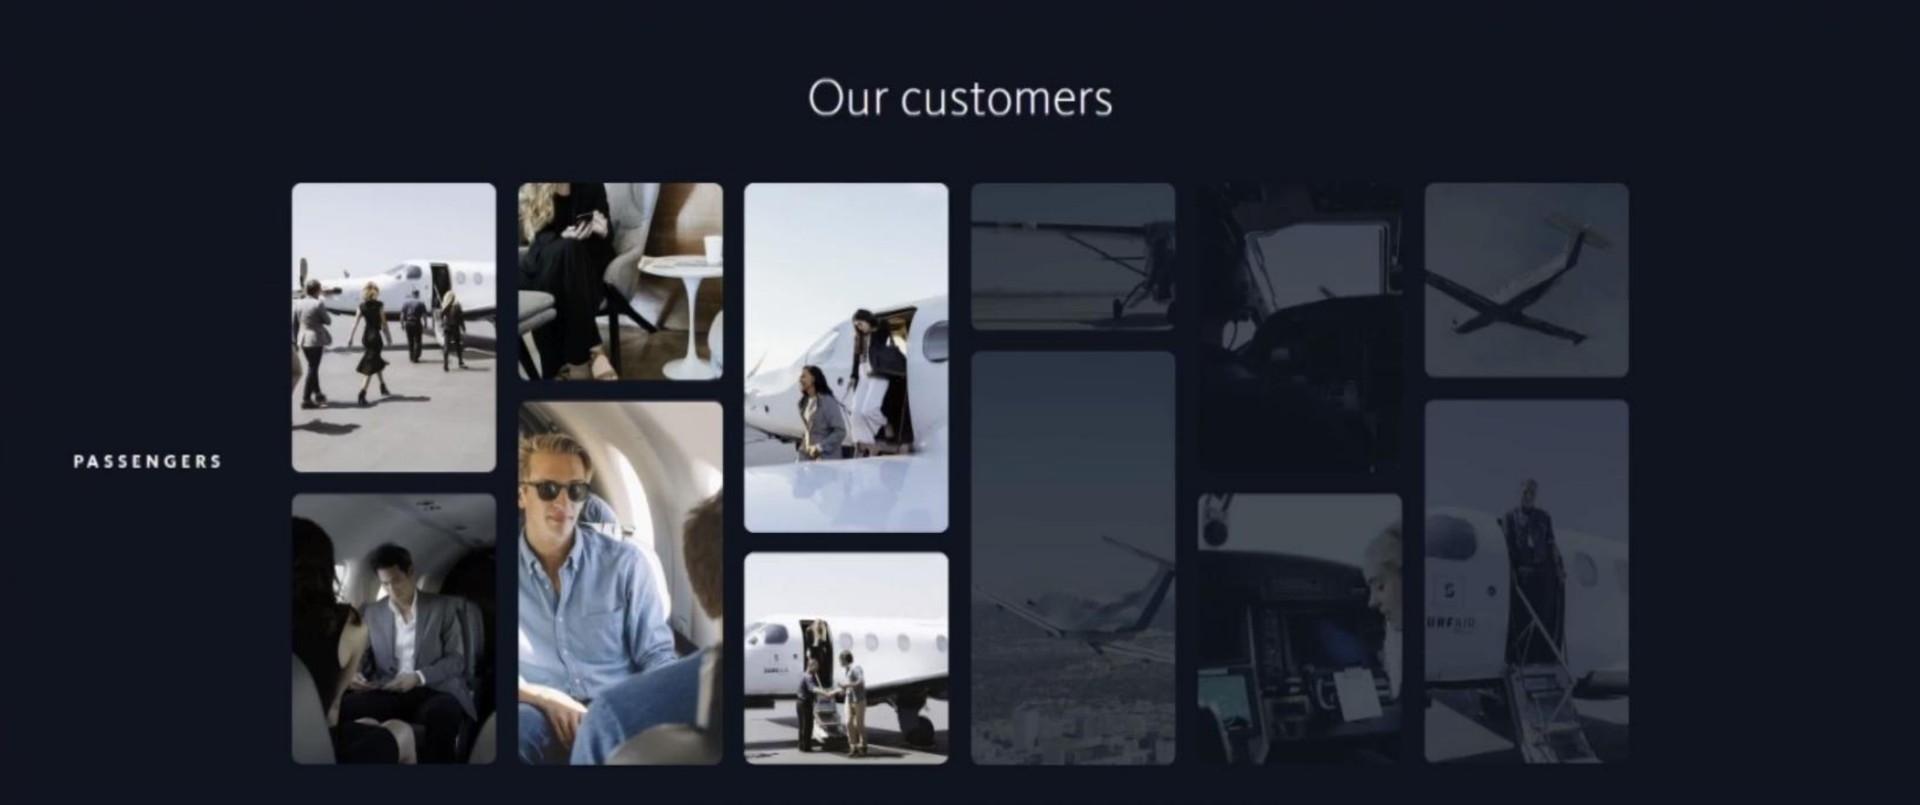 our customers passengers | Surf Air